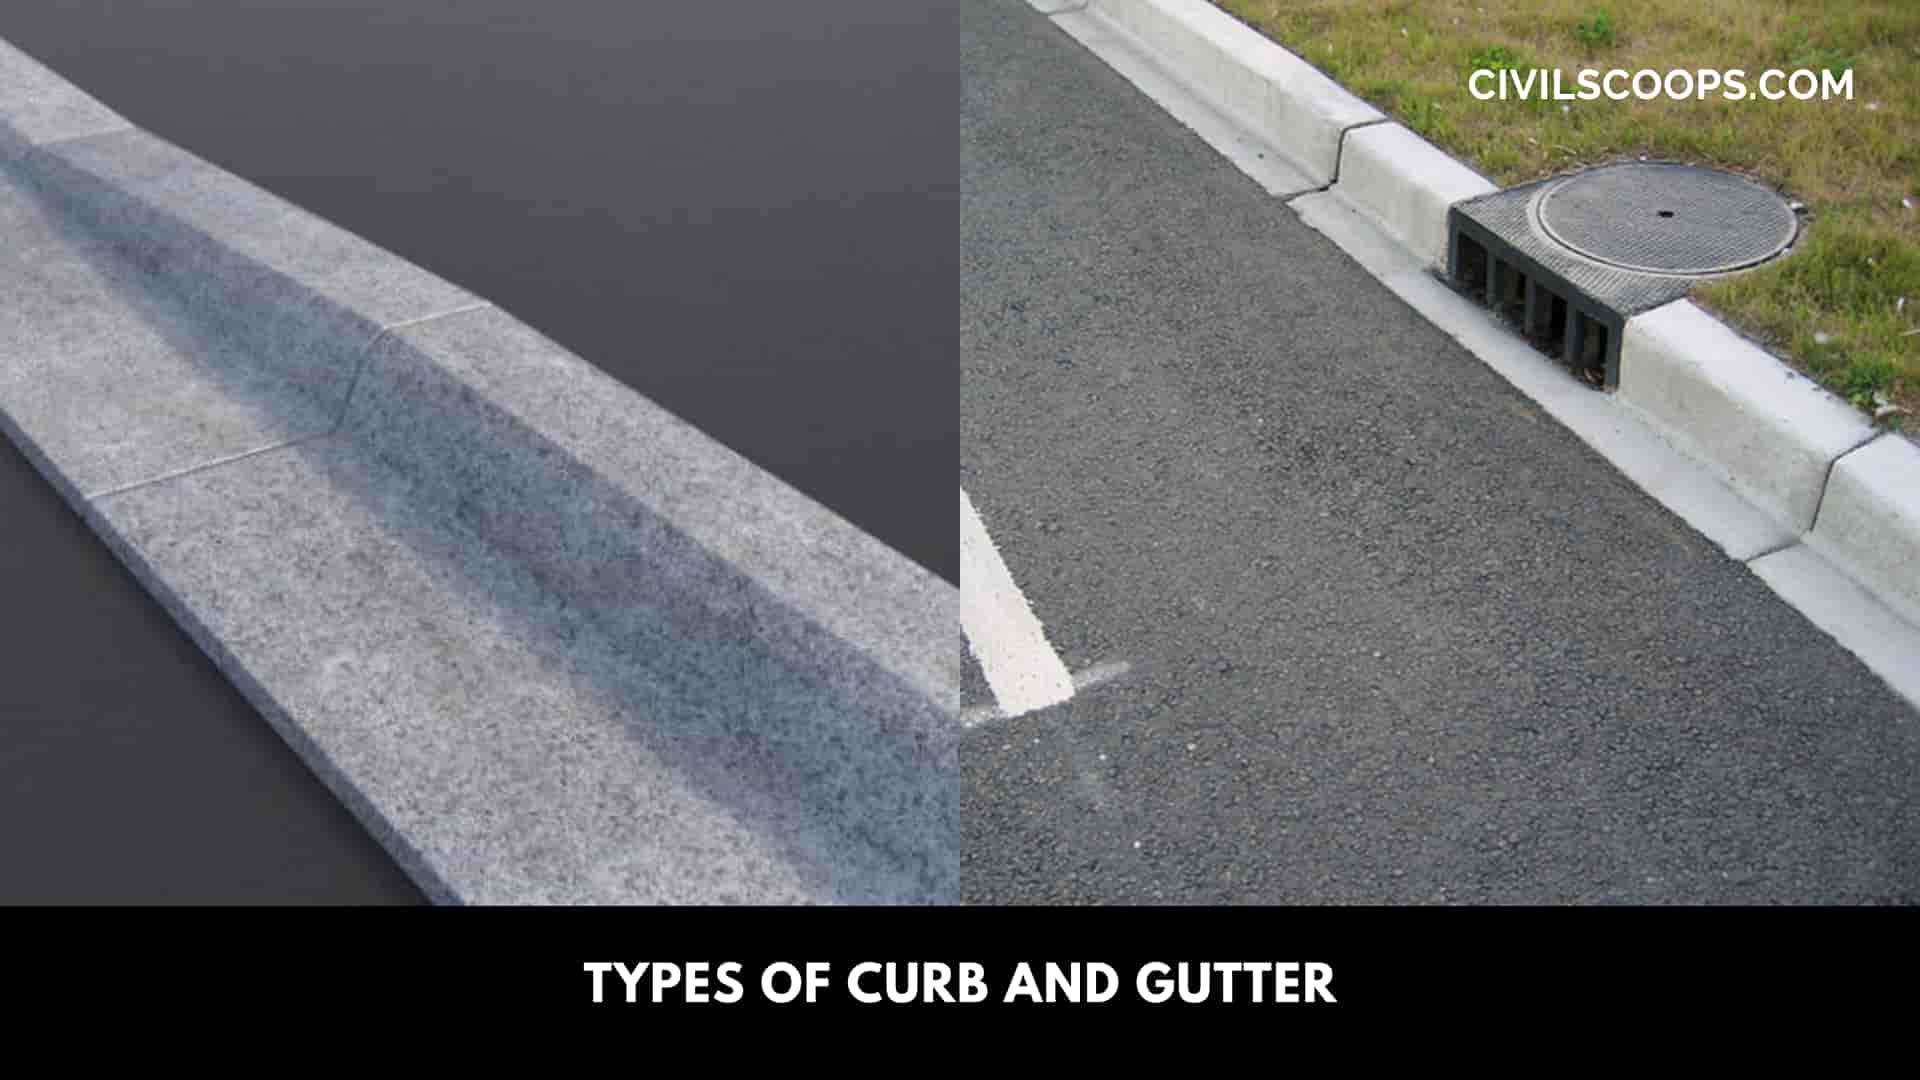 Types of Curb and Gutter